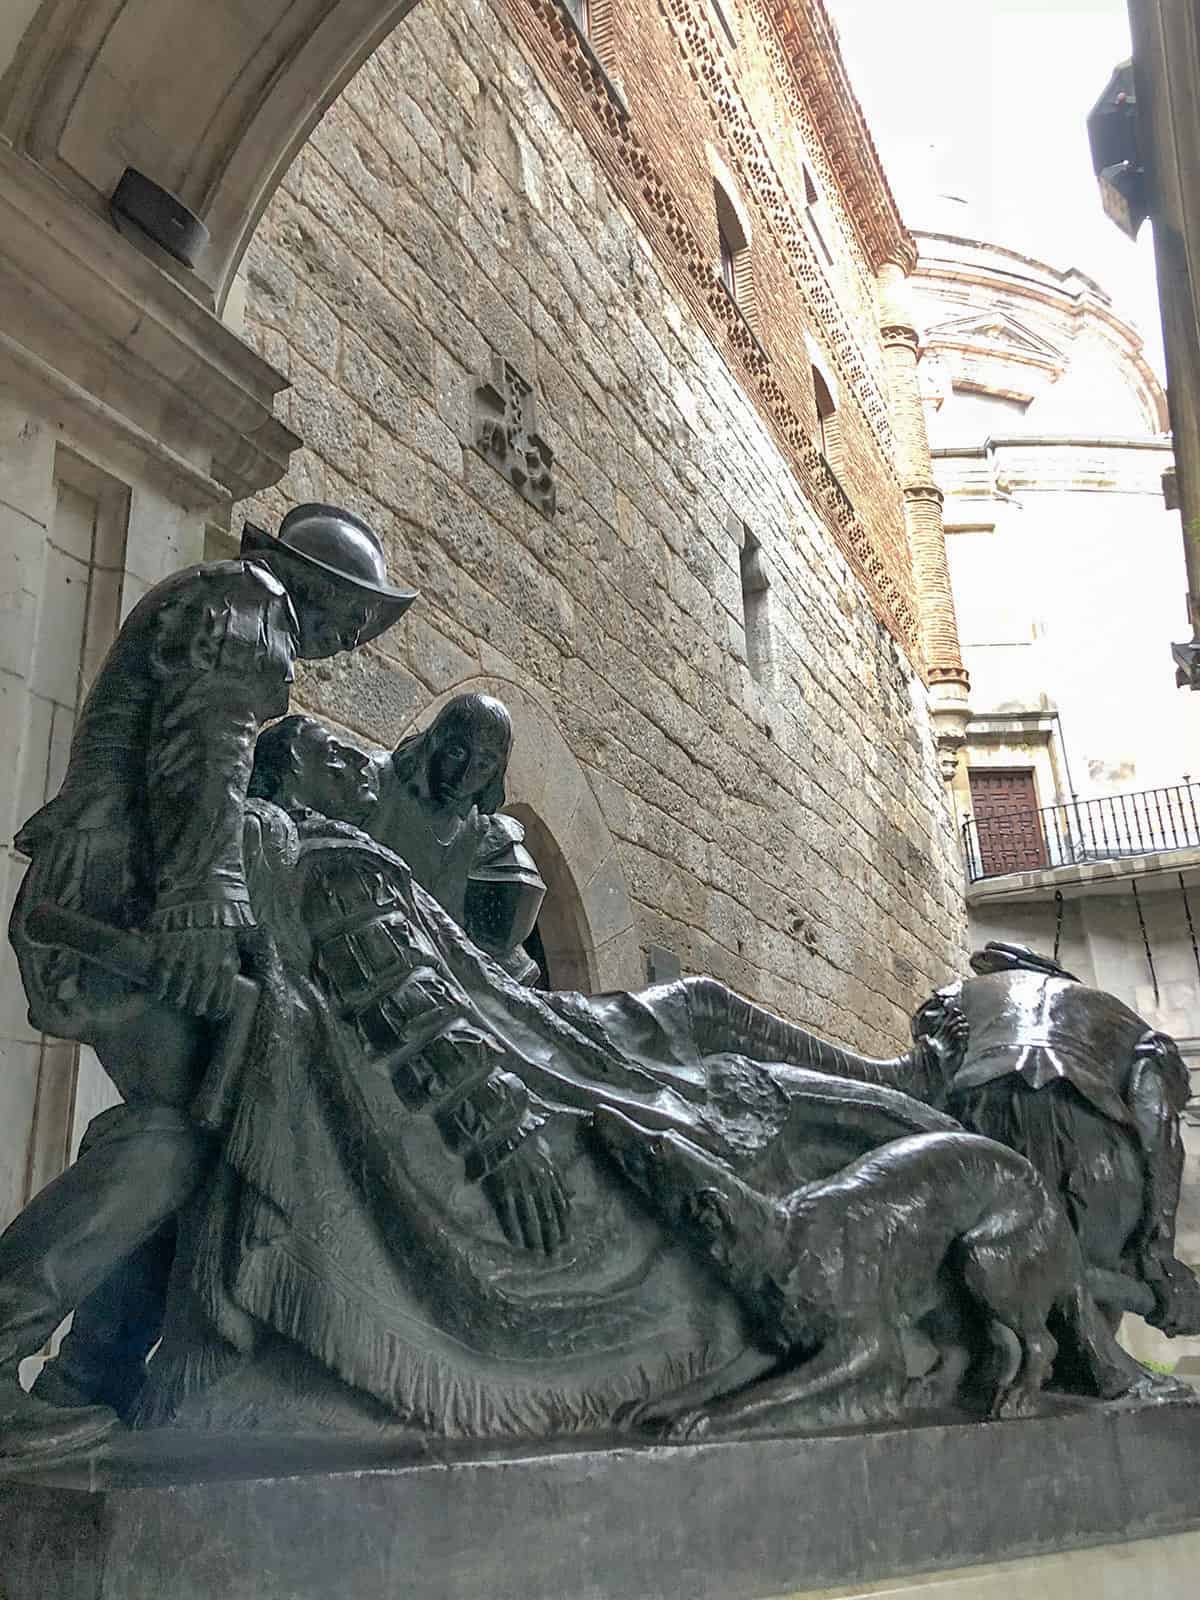 This statue is located at the entrance to the castle and home of St. Ignatius. His injury at the battle of Pamplona was the beginning of Ignatius’ recovery and eventual conversion